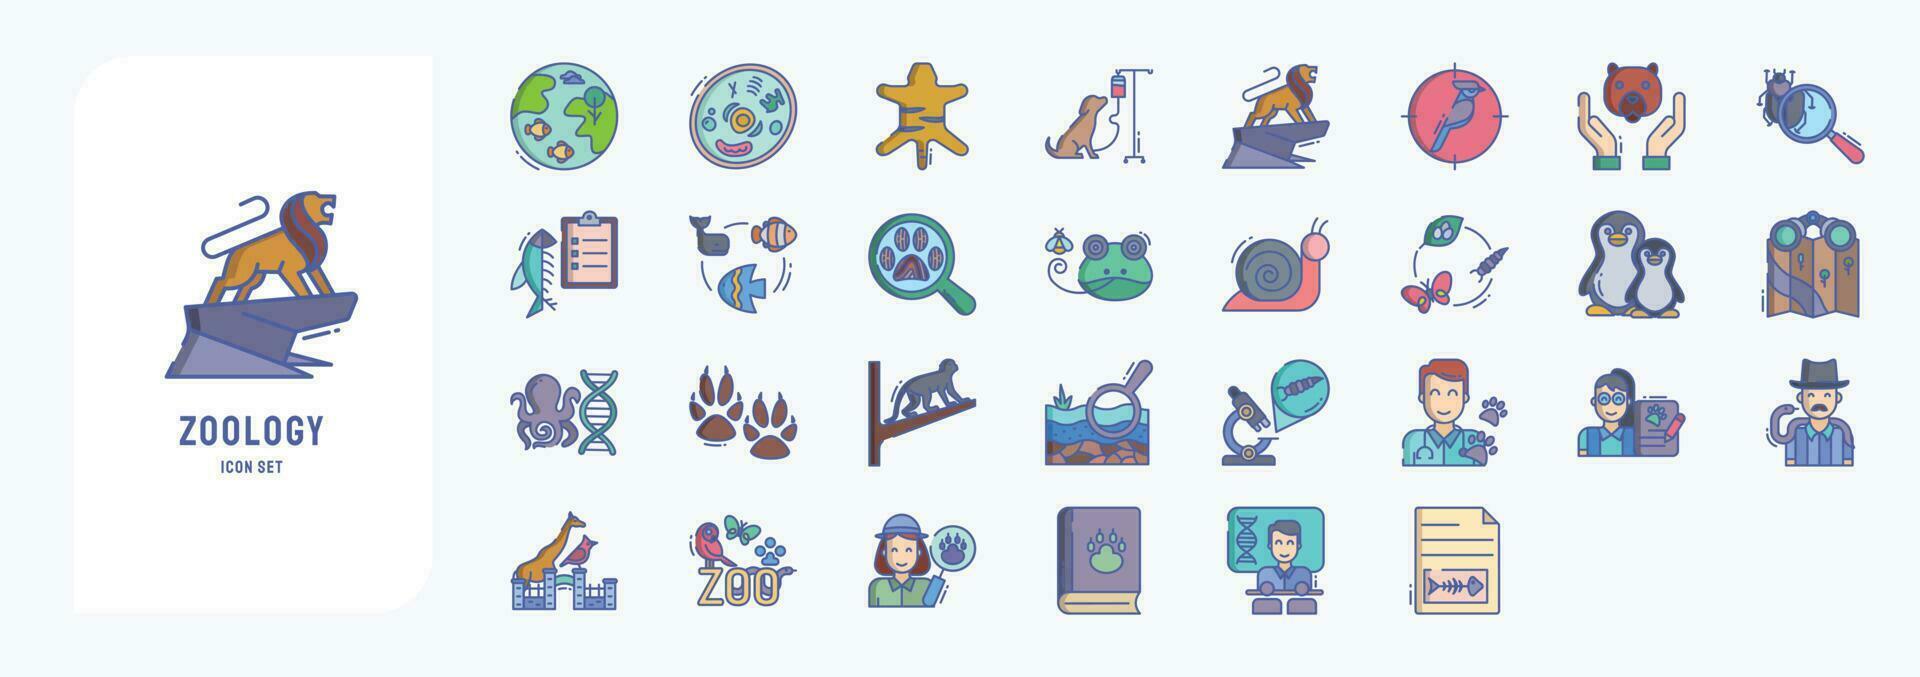 Collection of icons related to Zoology, including icons like Animal cell, Animal, Birds, Ichthyology and more vector